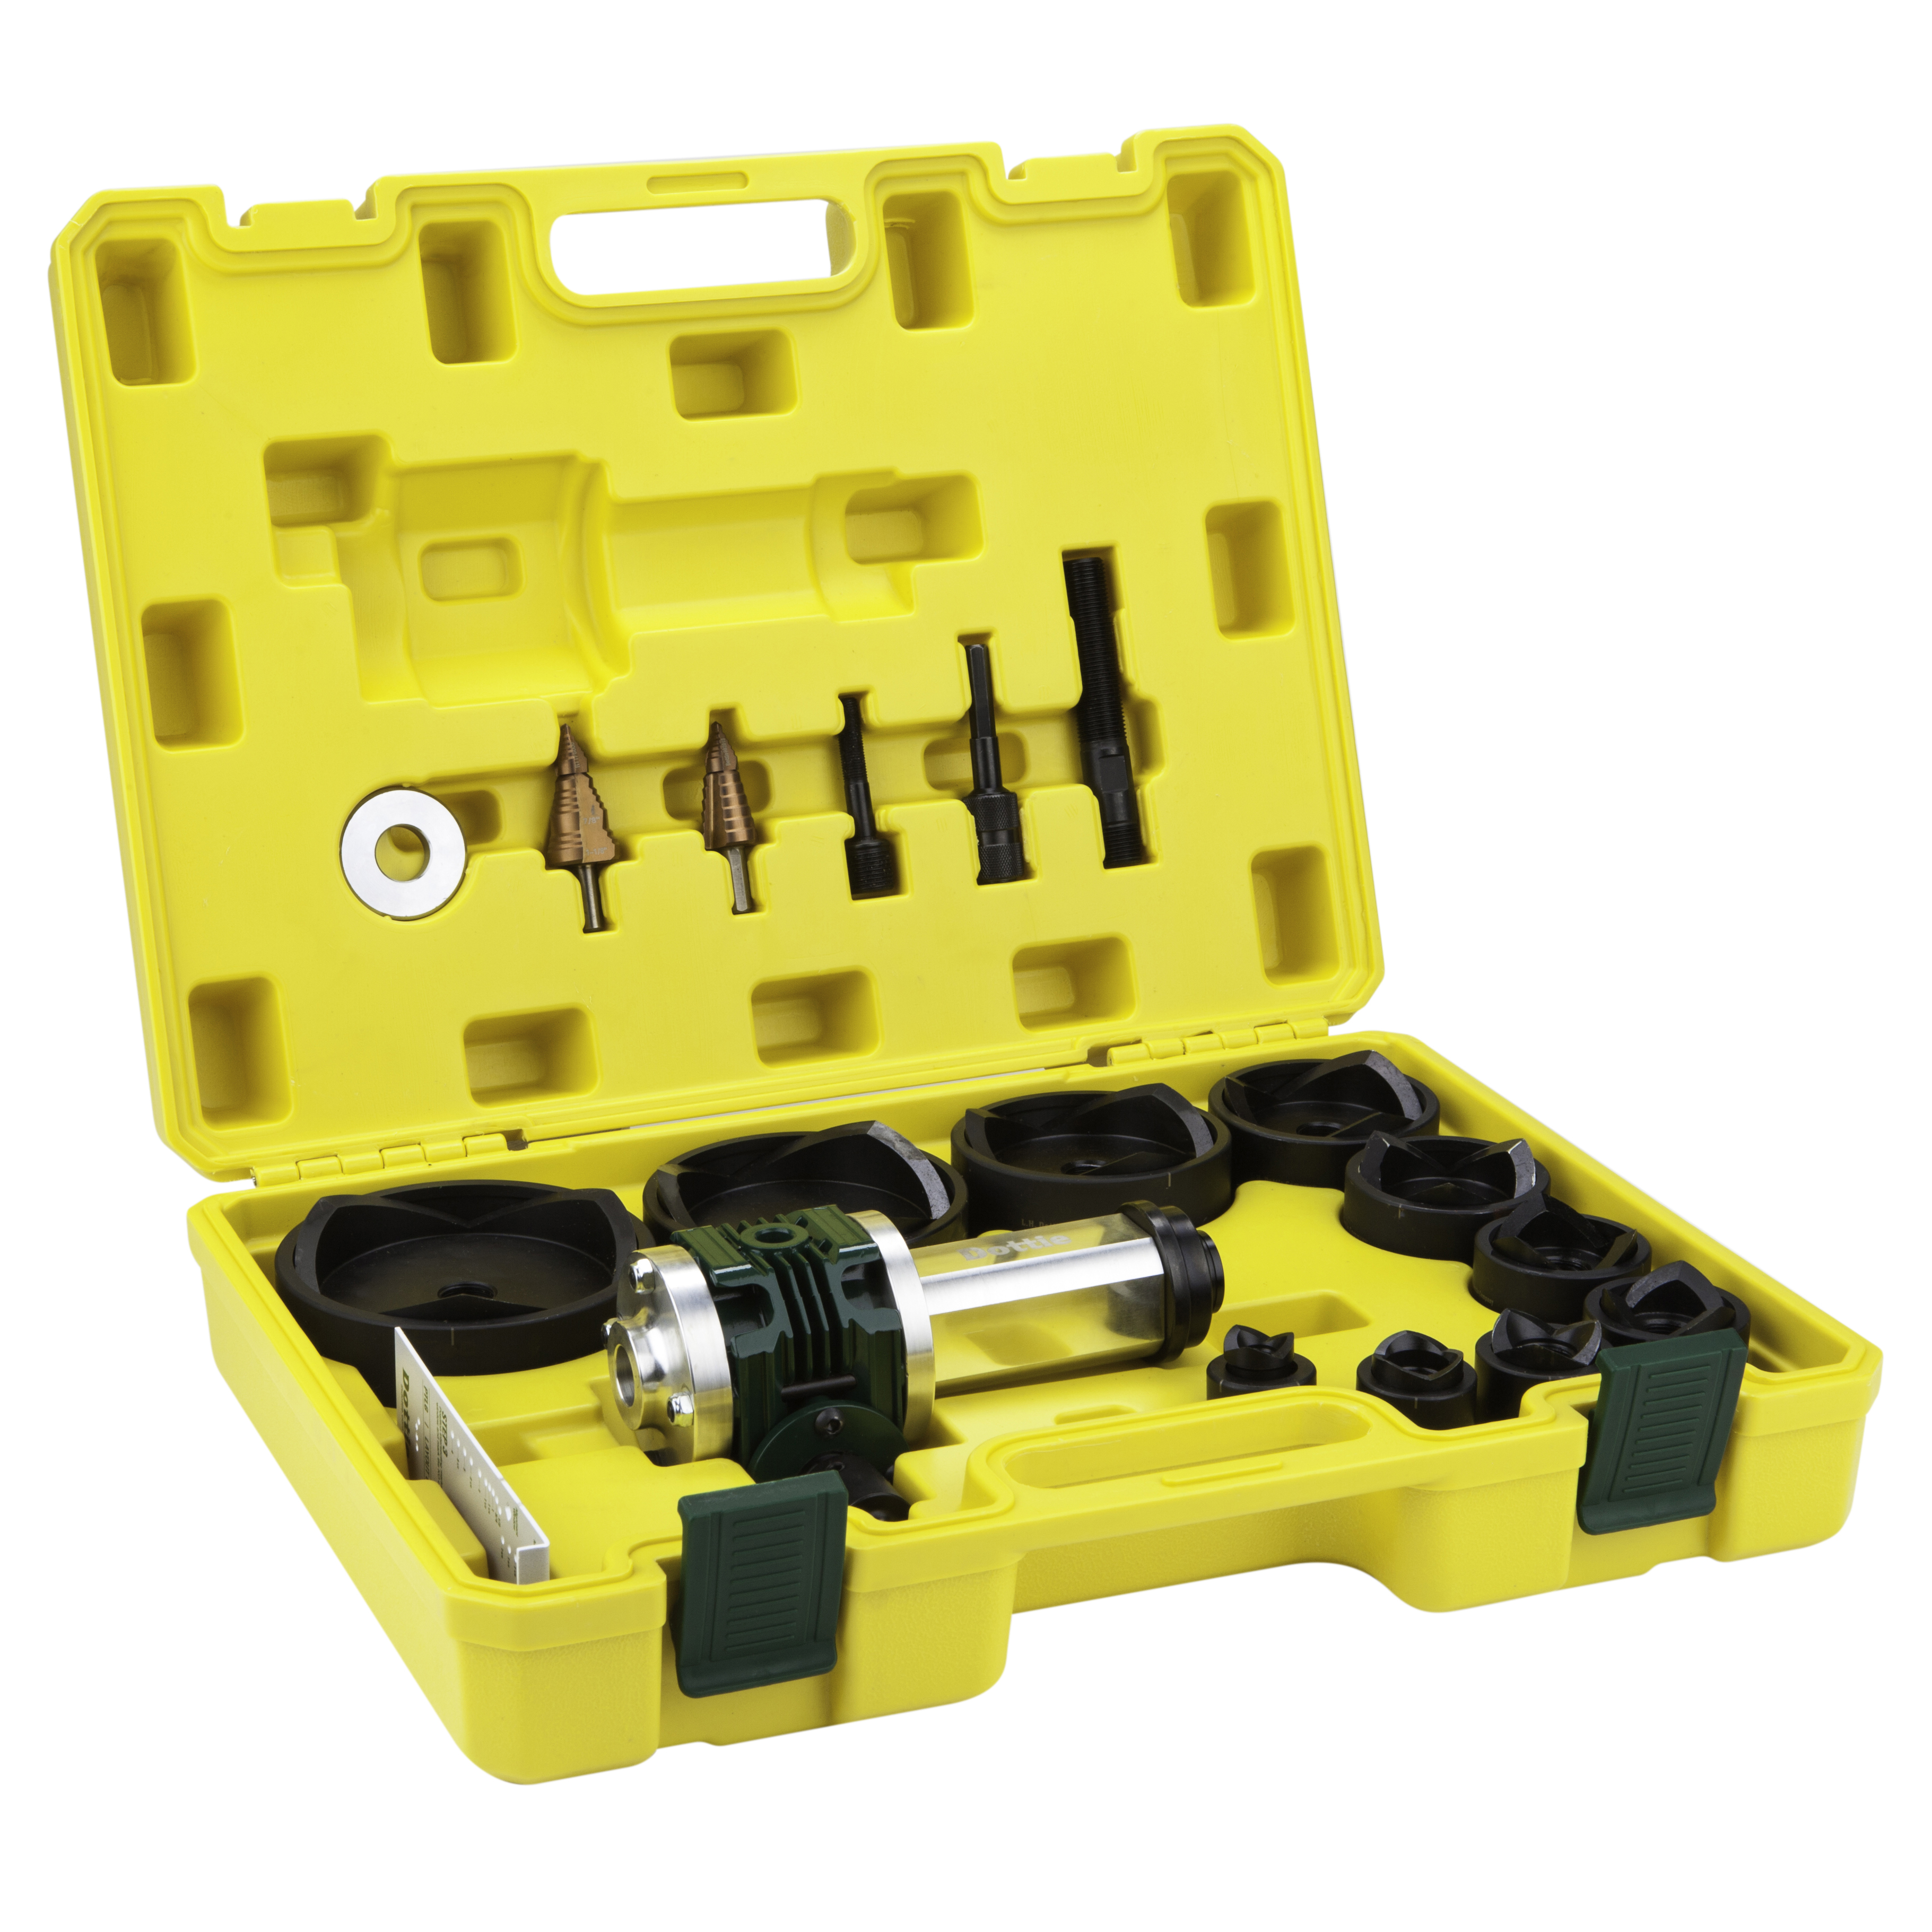 Gear Punch Tool Kit (19pcs set, includes case and gear punch)